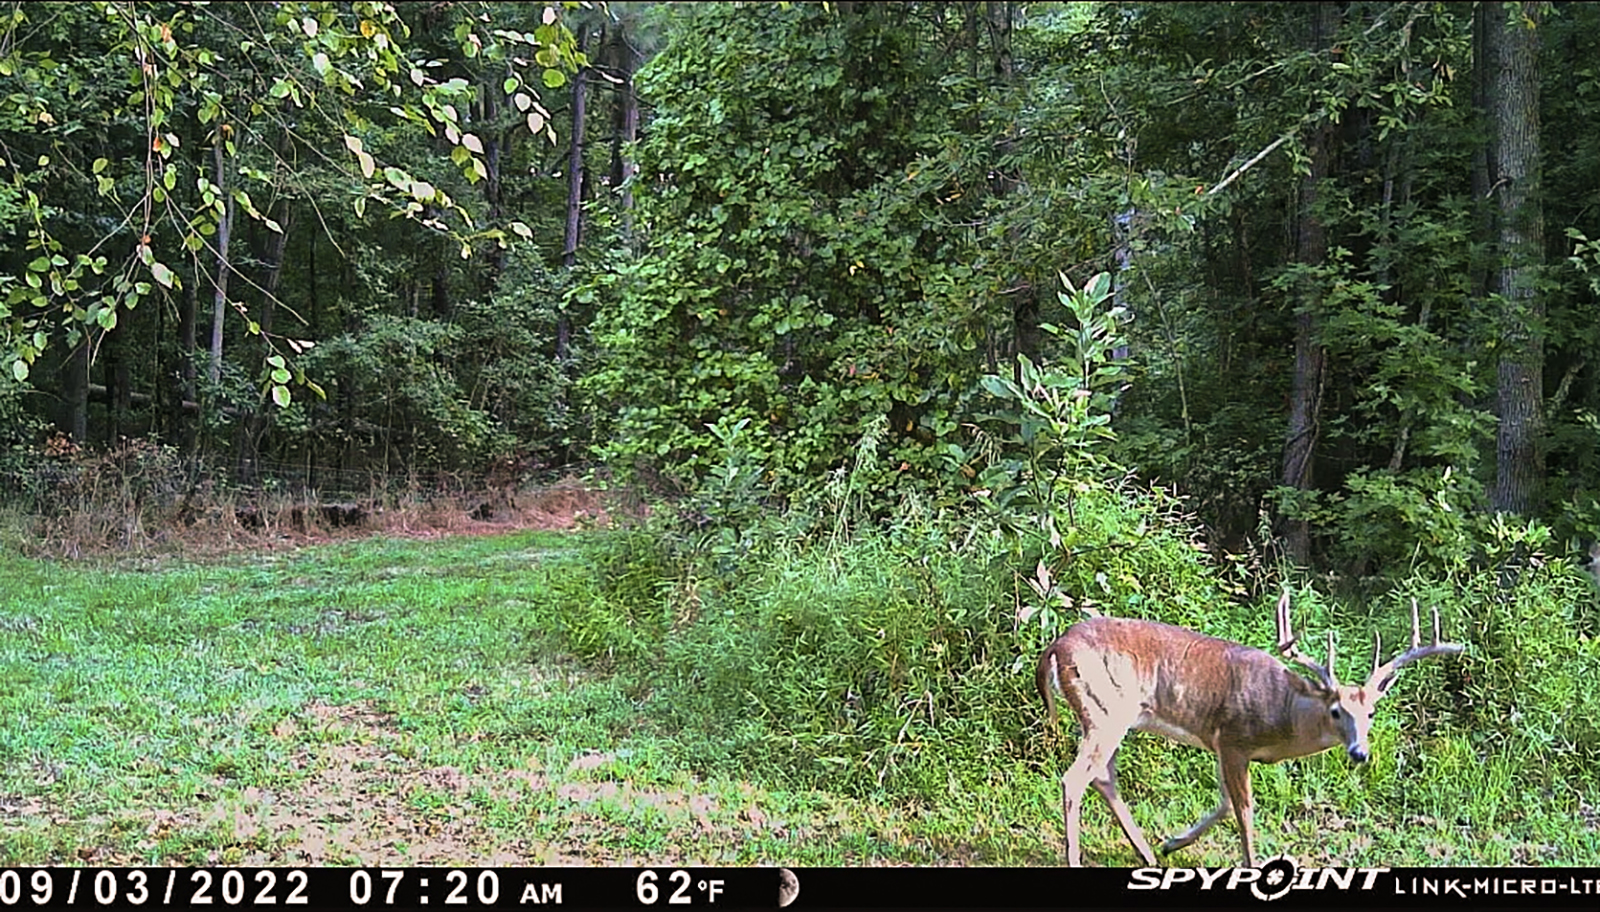 A trail camera photo of a 10-point buck in a clearing in the woods with lush green vegetation.